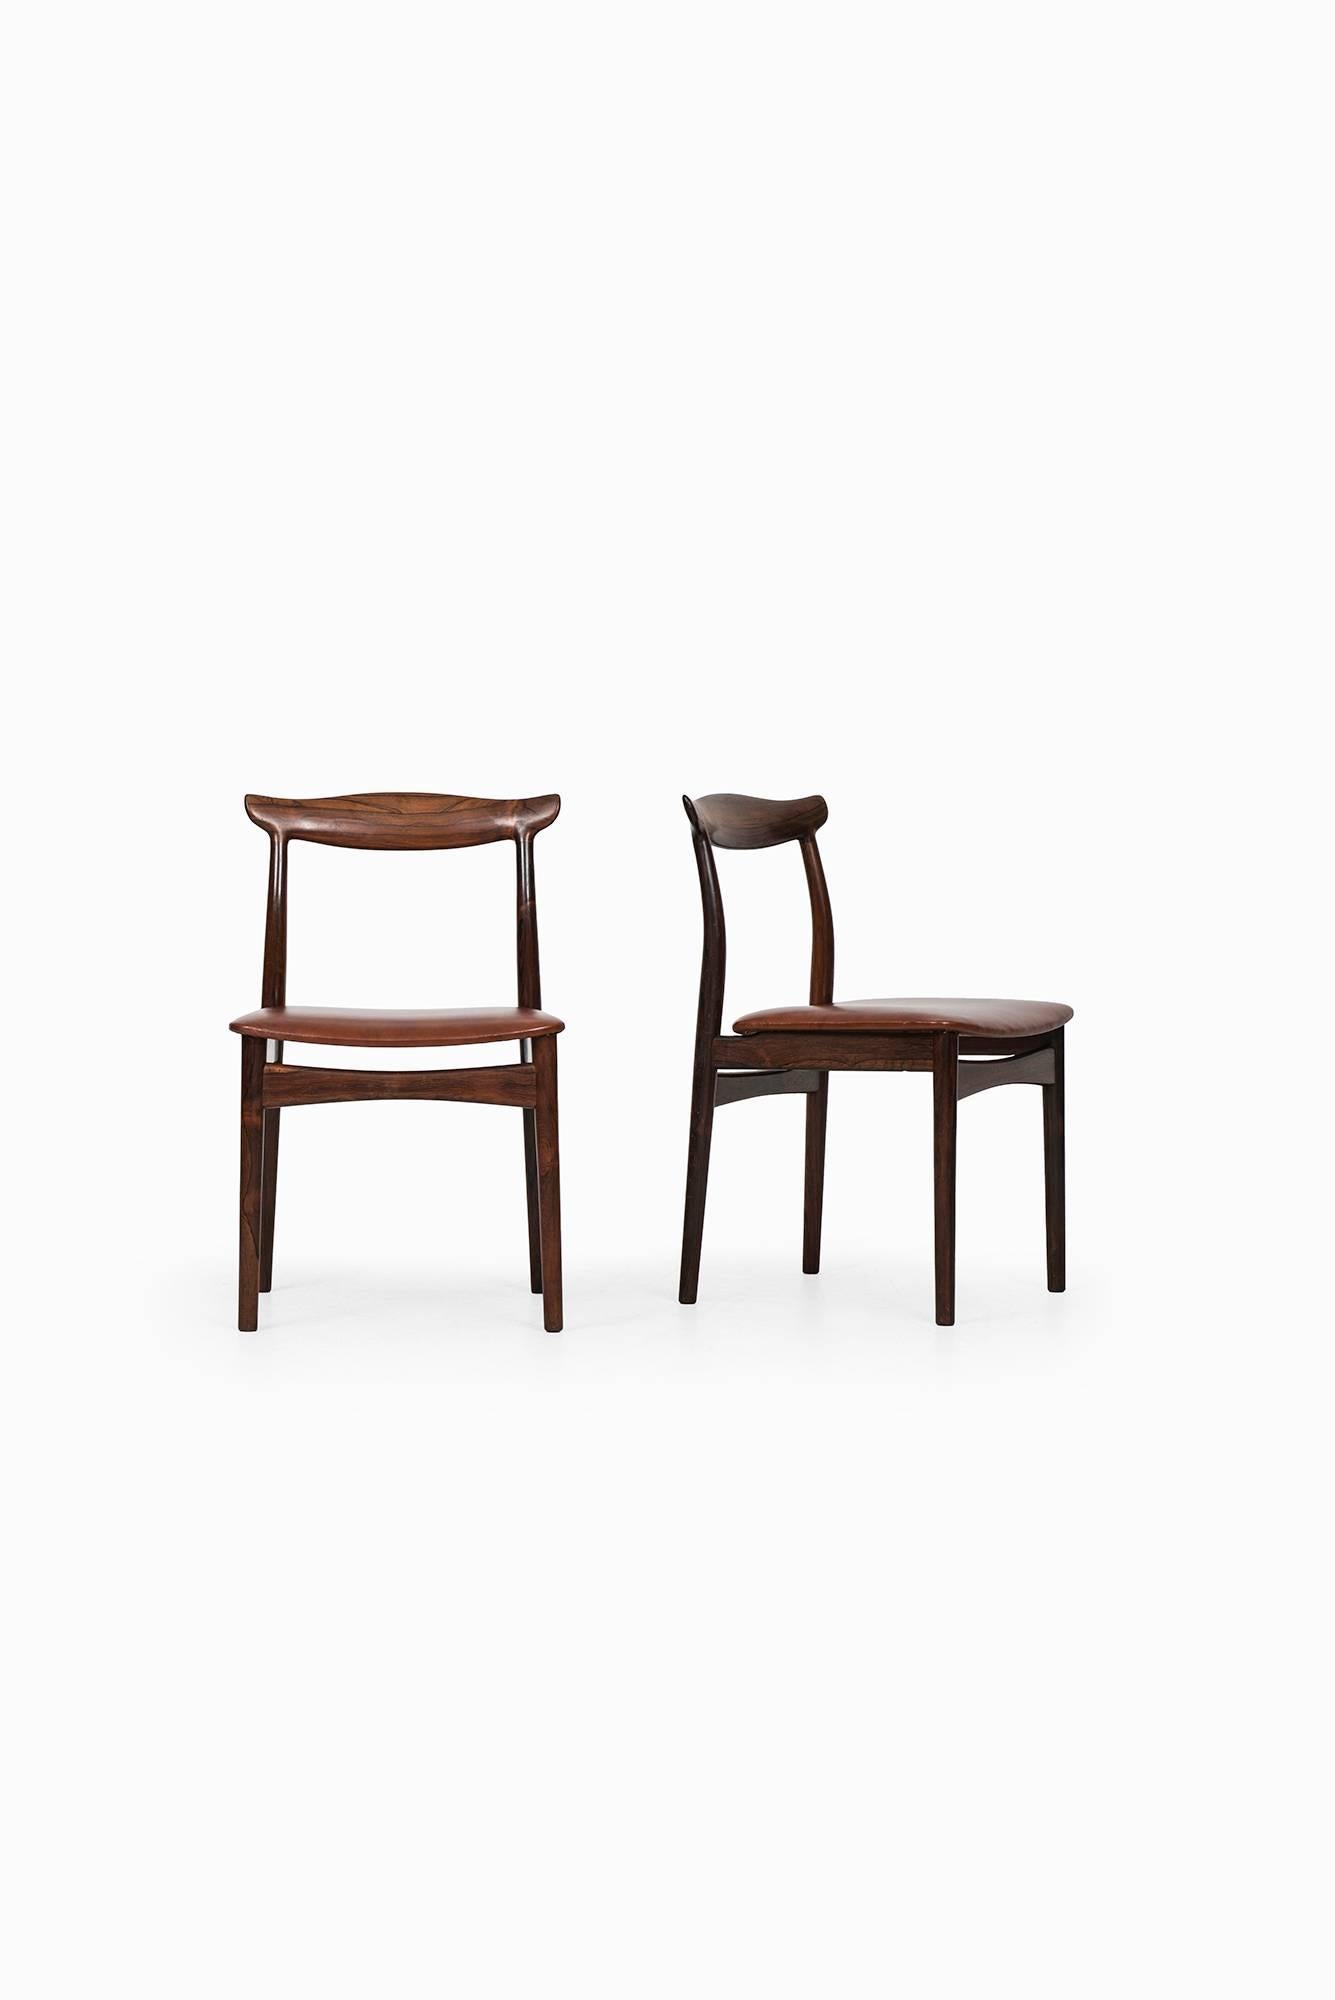 Rare set of six dining chairs model 112 designed by Erik Wørts. Produced by Vamo Sønderborg in Denmark. Reupholstered in new leather.